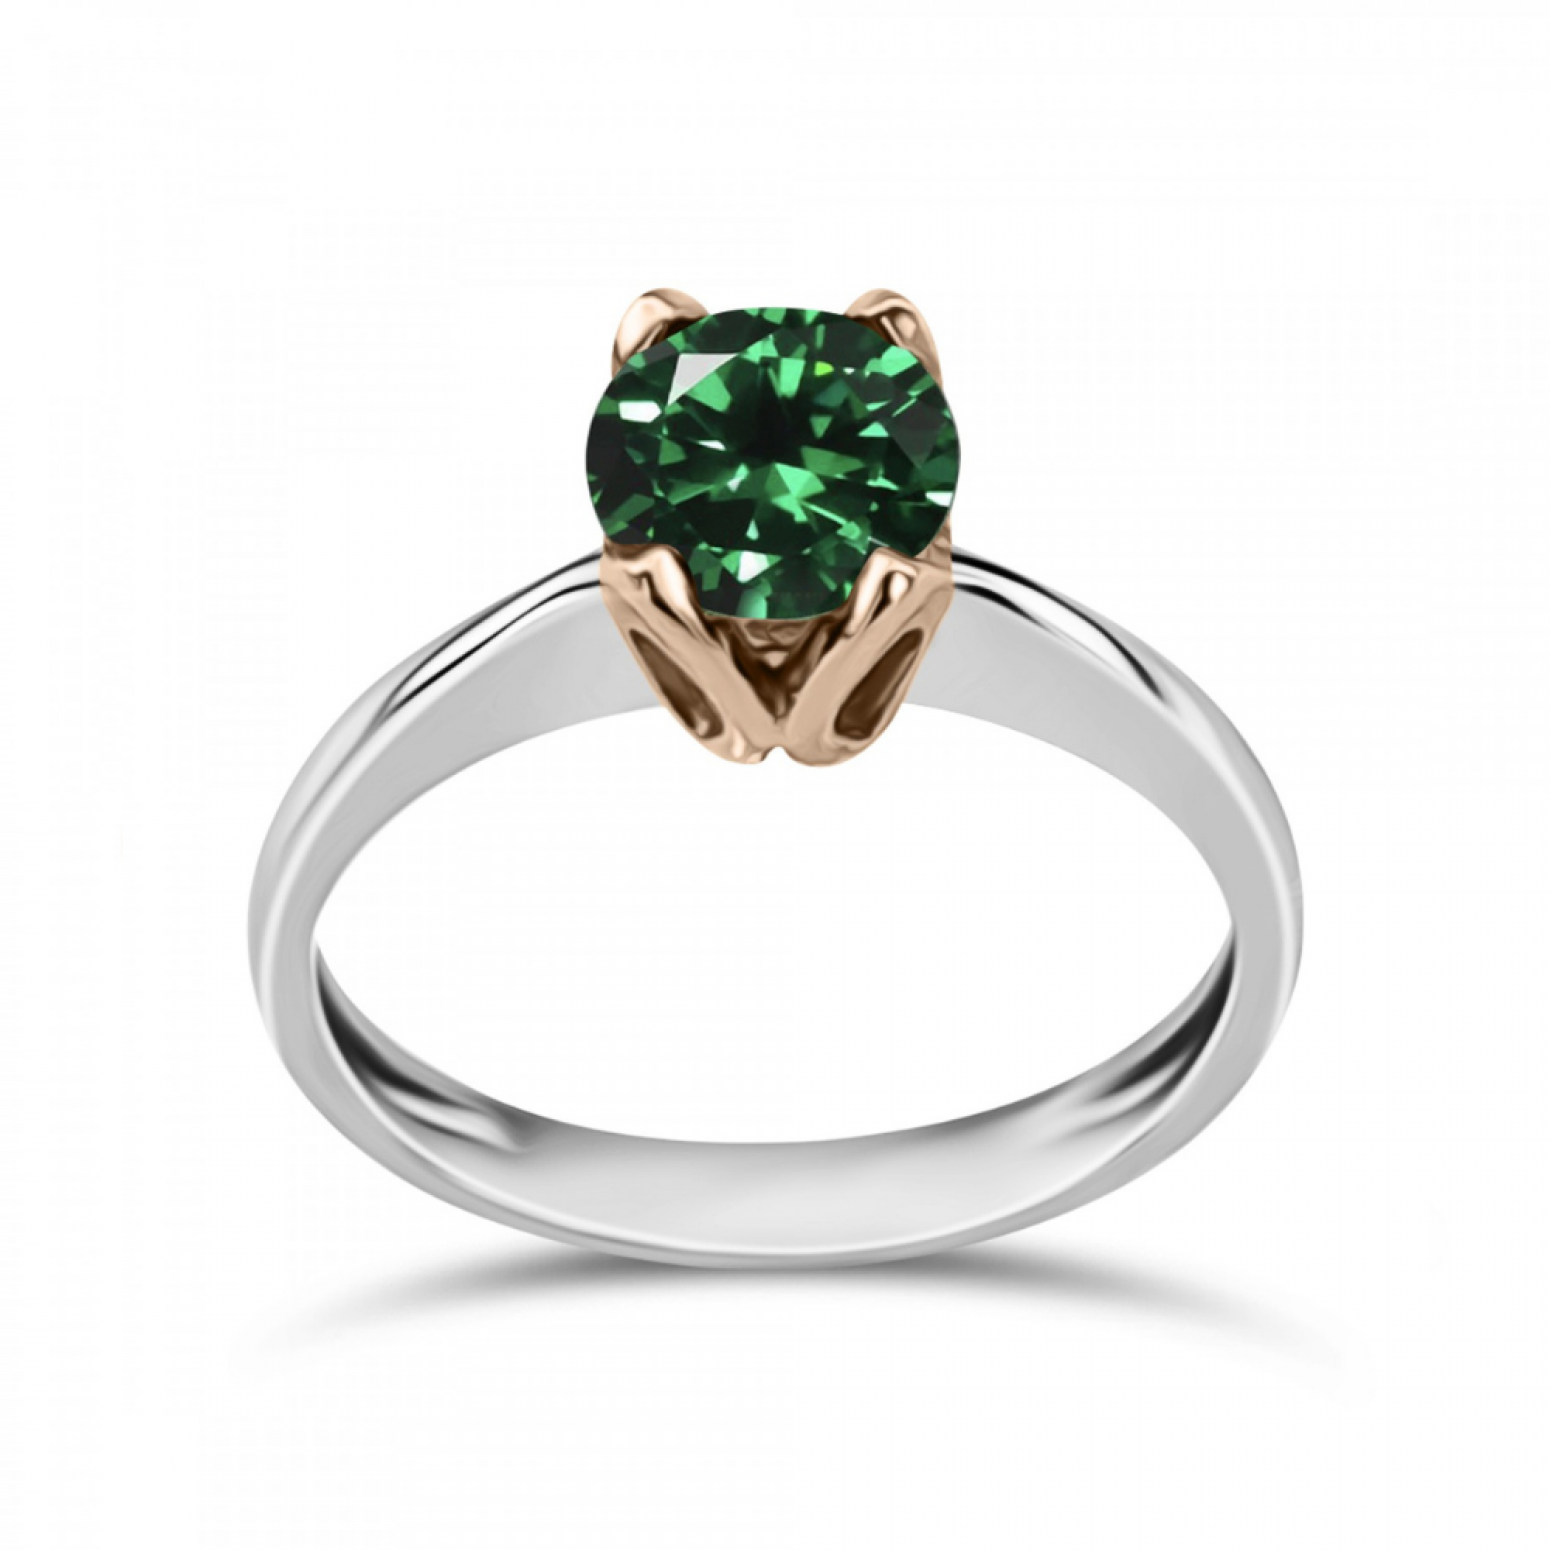 Solitaire ring 14K white and pink gold with green zircon, da3423 ENGAGEMENT RINGS Κοσμηματα - chrilia.gr